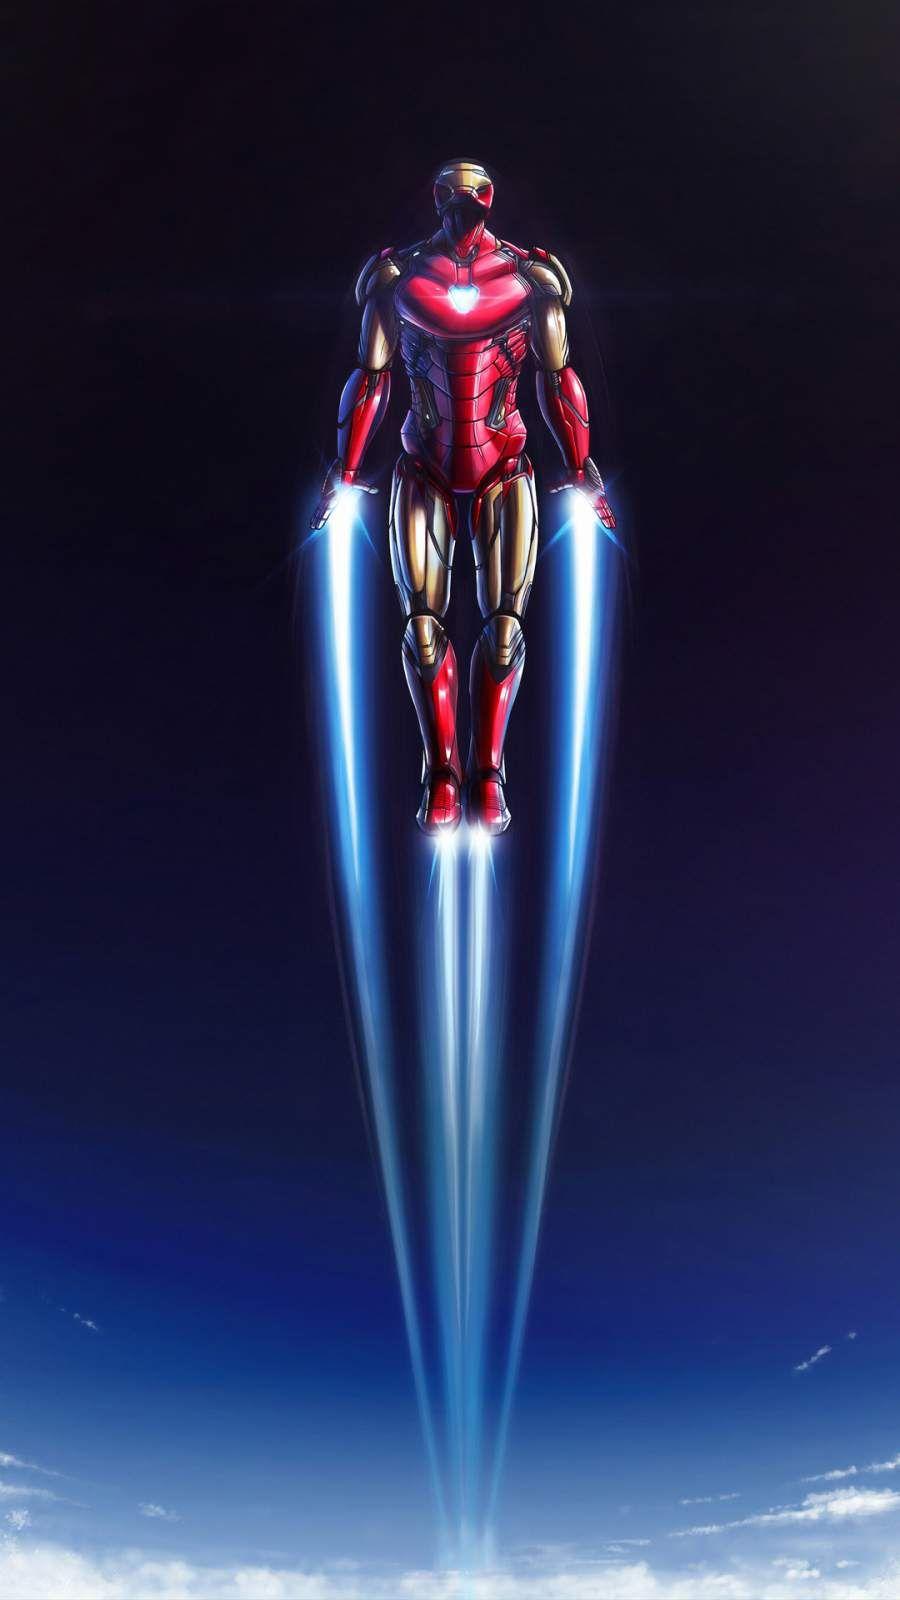 Iron Man Flying iPhone Wallpapers - Wallpaper Cave